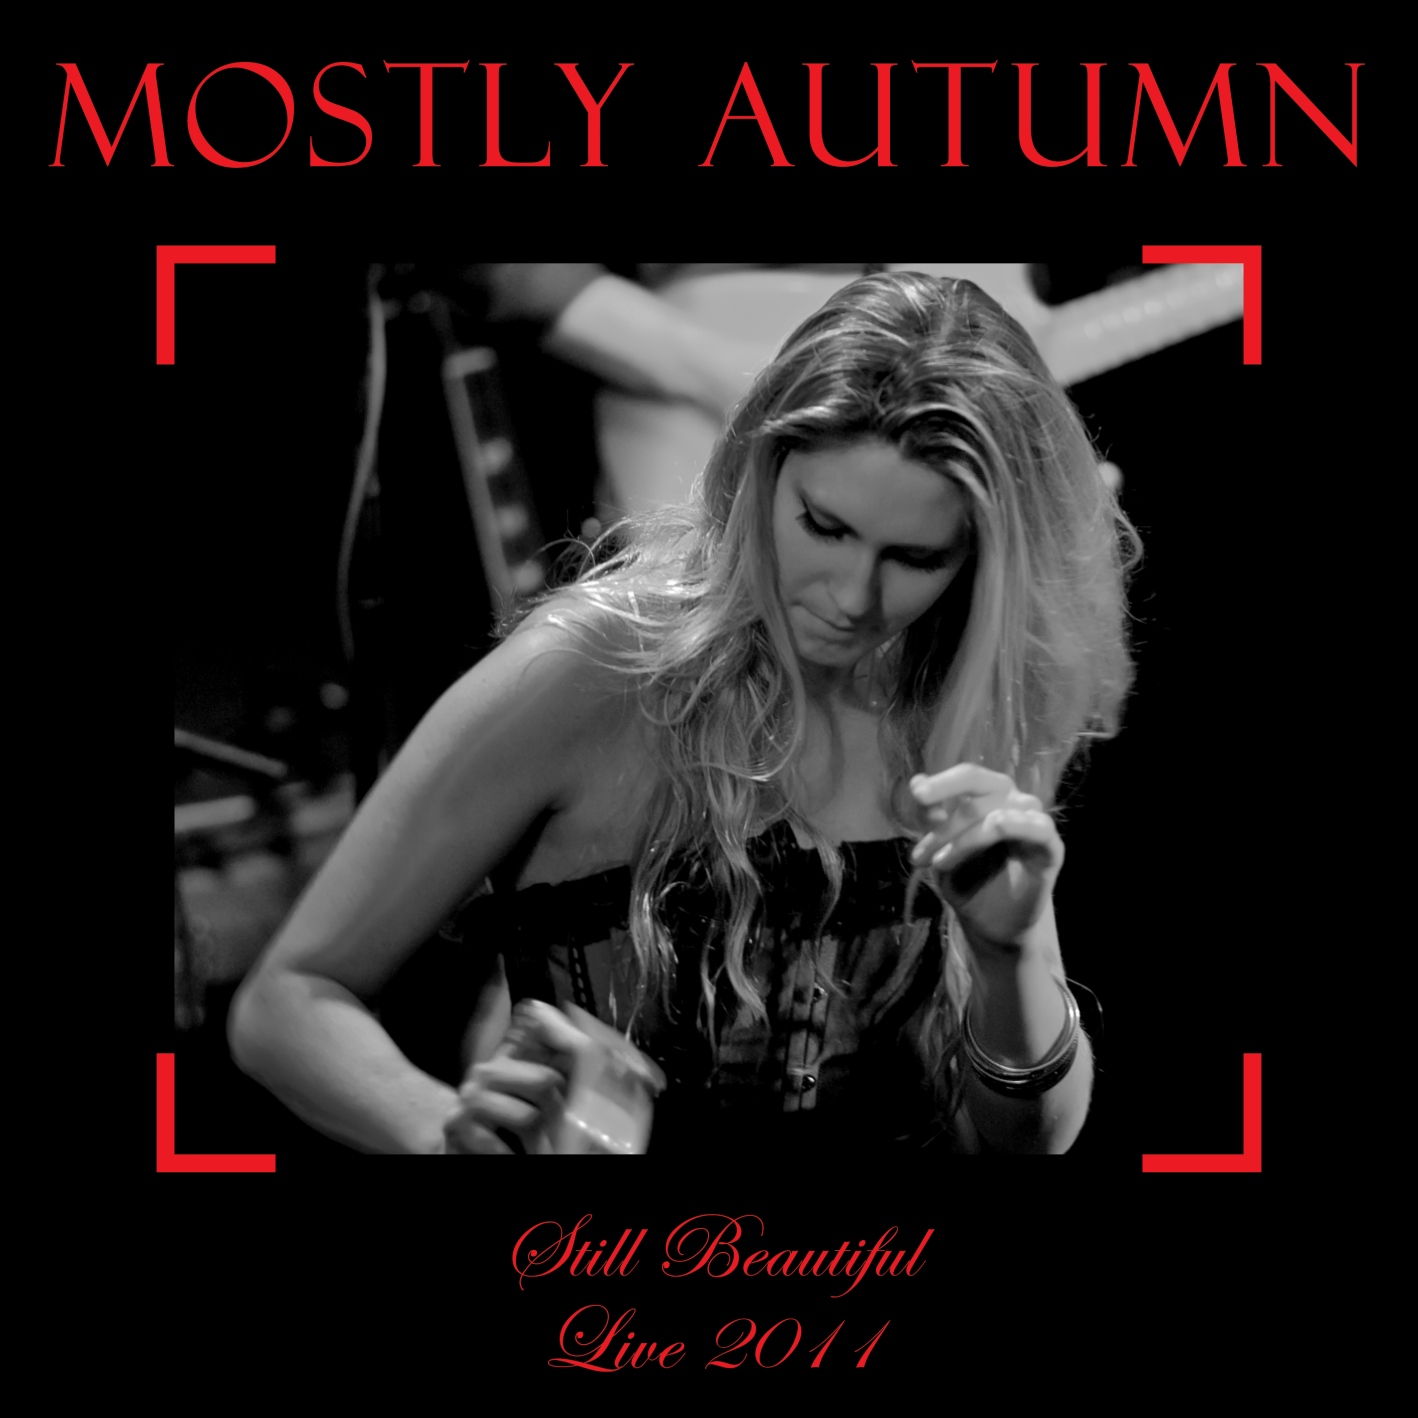 Still Beautiful – Mostly Autumn Live 2011… | Mostly Autumn